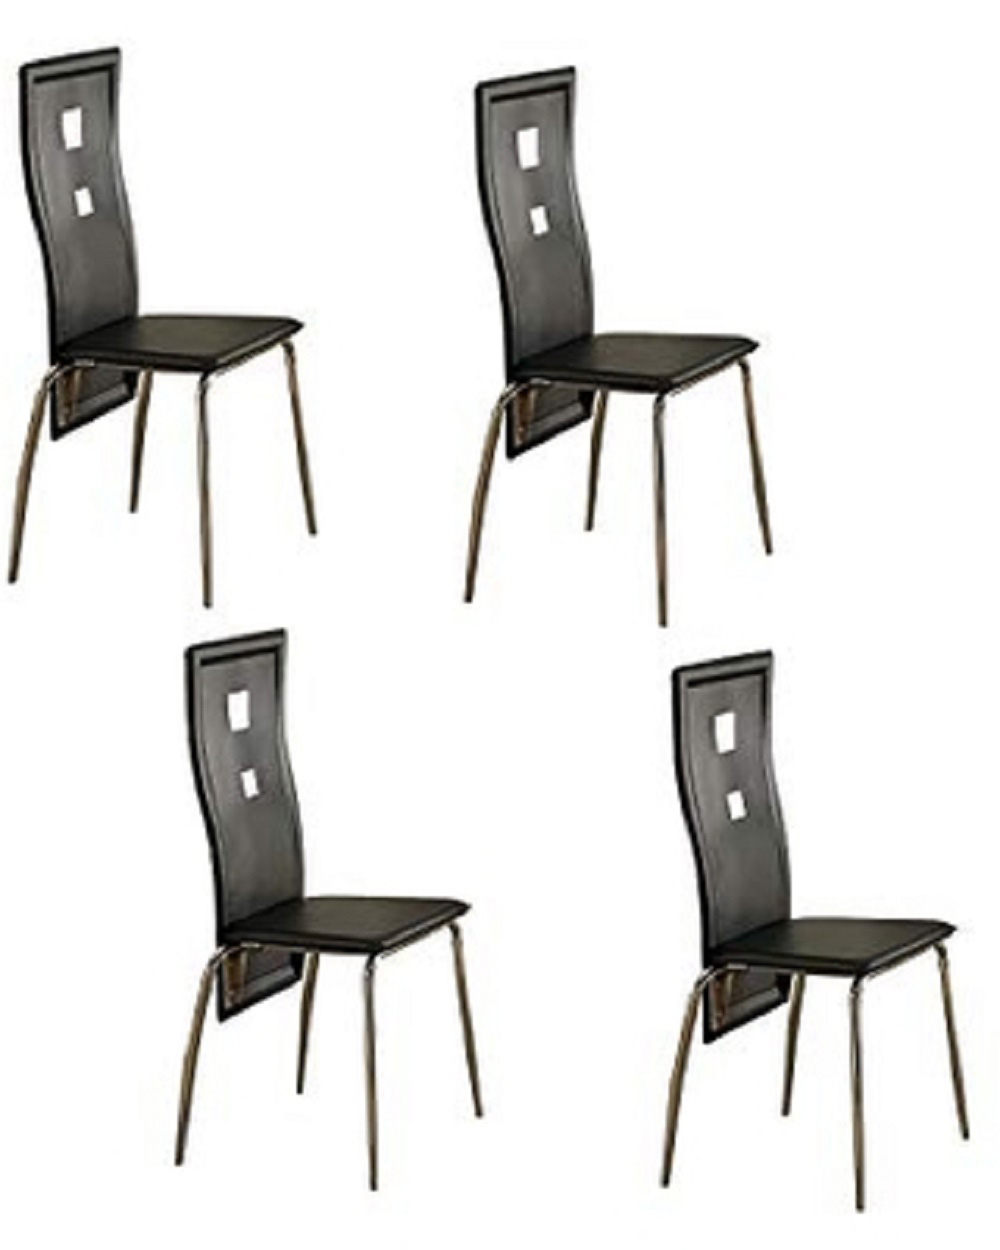 Faux Leather Upholstered Dining Chair Set of 4, with Curved Backrest, and Metal Legs, for Restaurant, Cafe, Tavern, Office, Living Room - Black